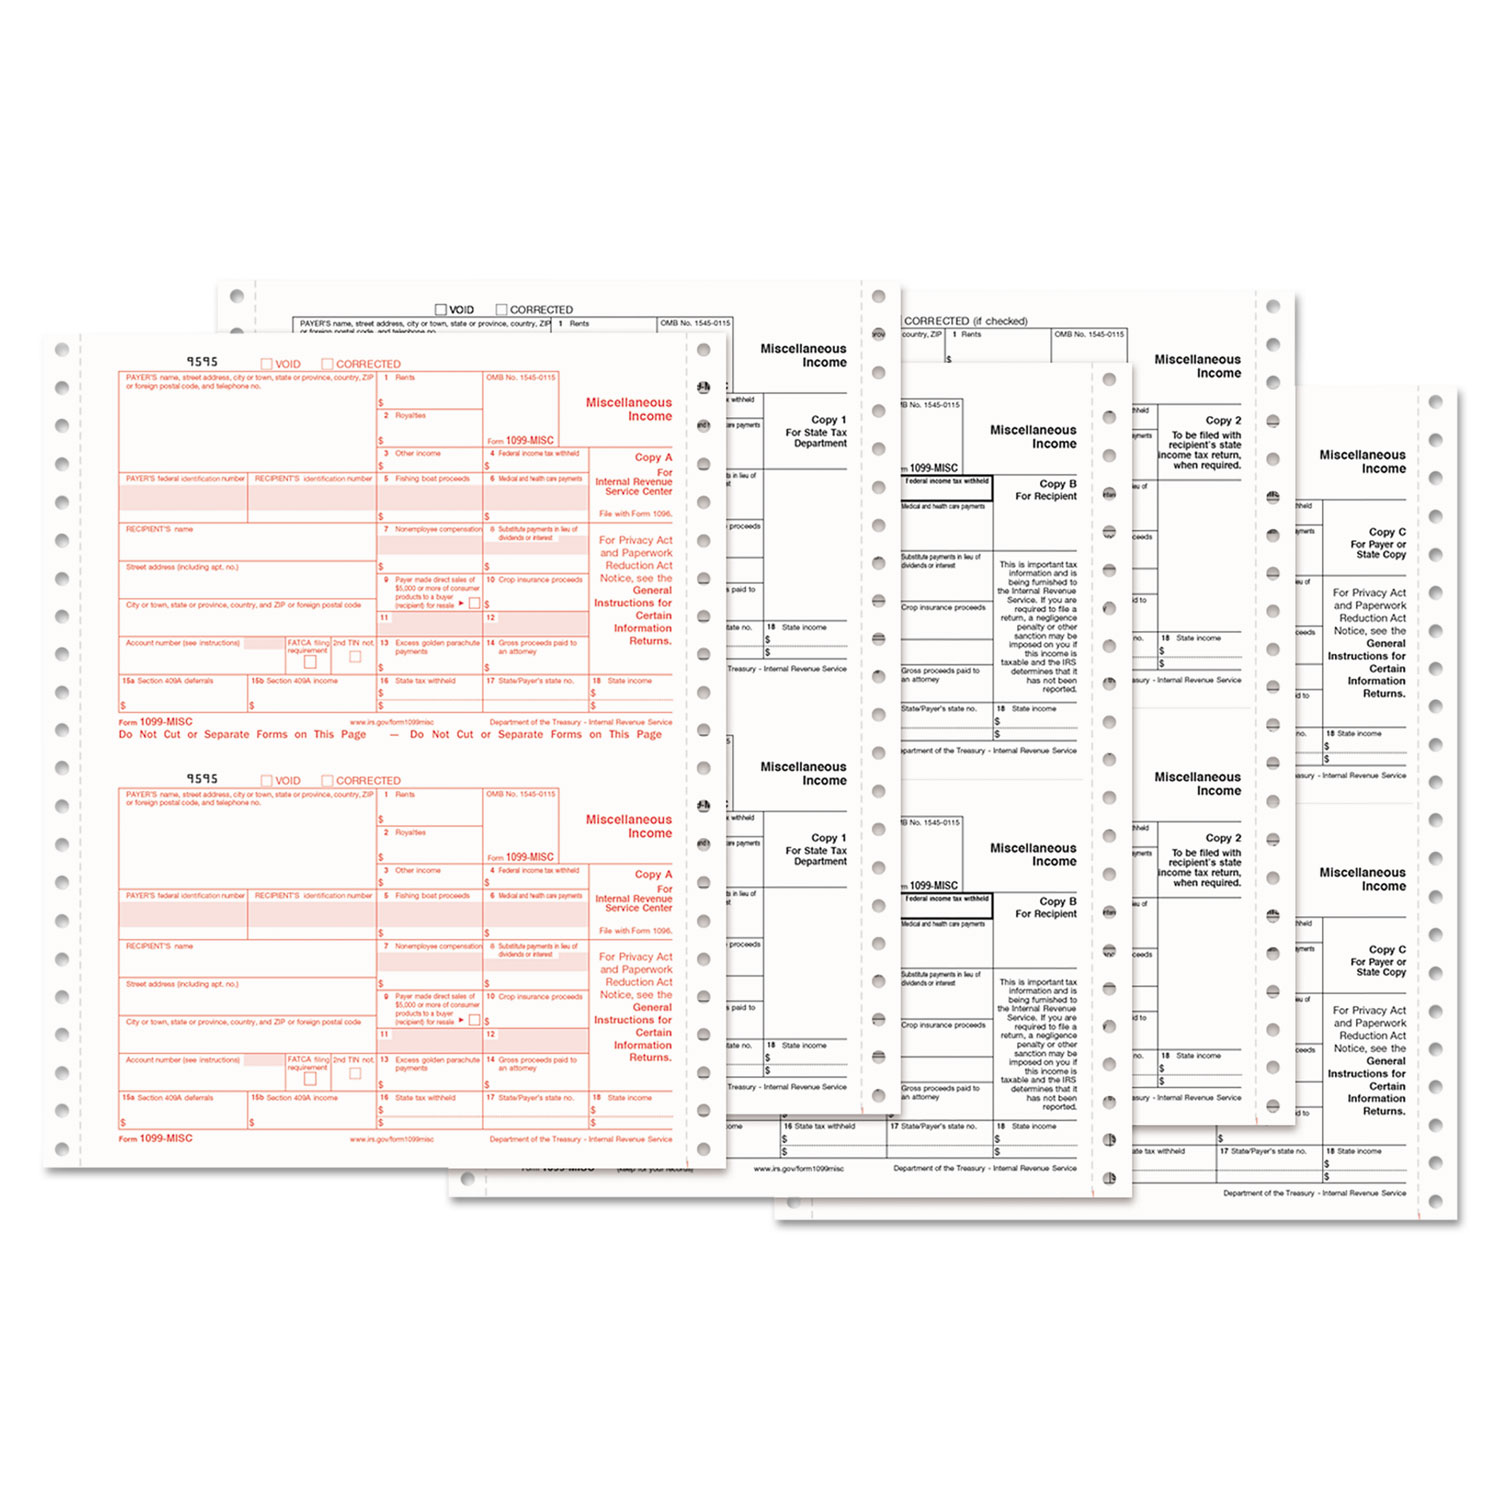  TOPS 22995 1099-MISC Tax Forms, 5-Part Carbonless, 5 1/2 x 8, 24 1099s & 1 1096 (TOP22995) 